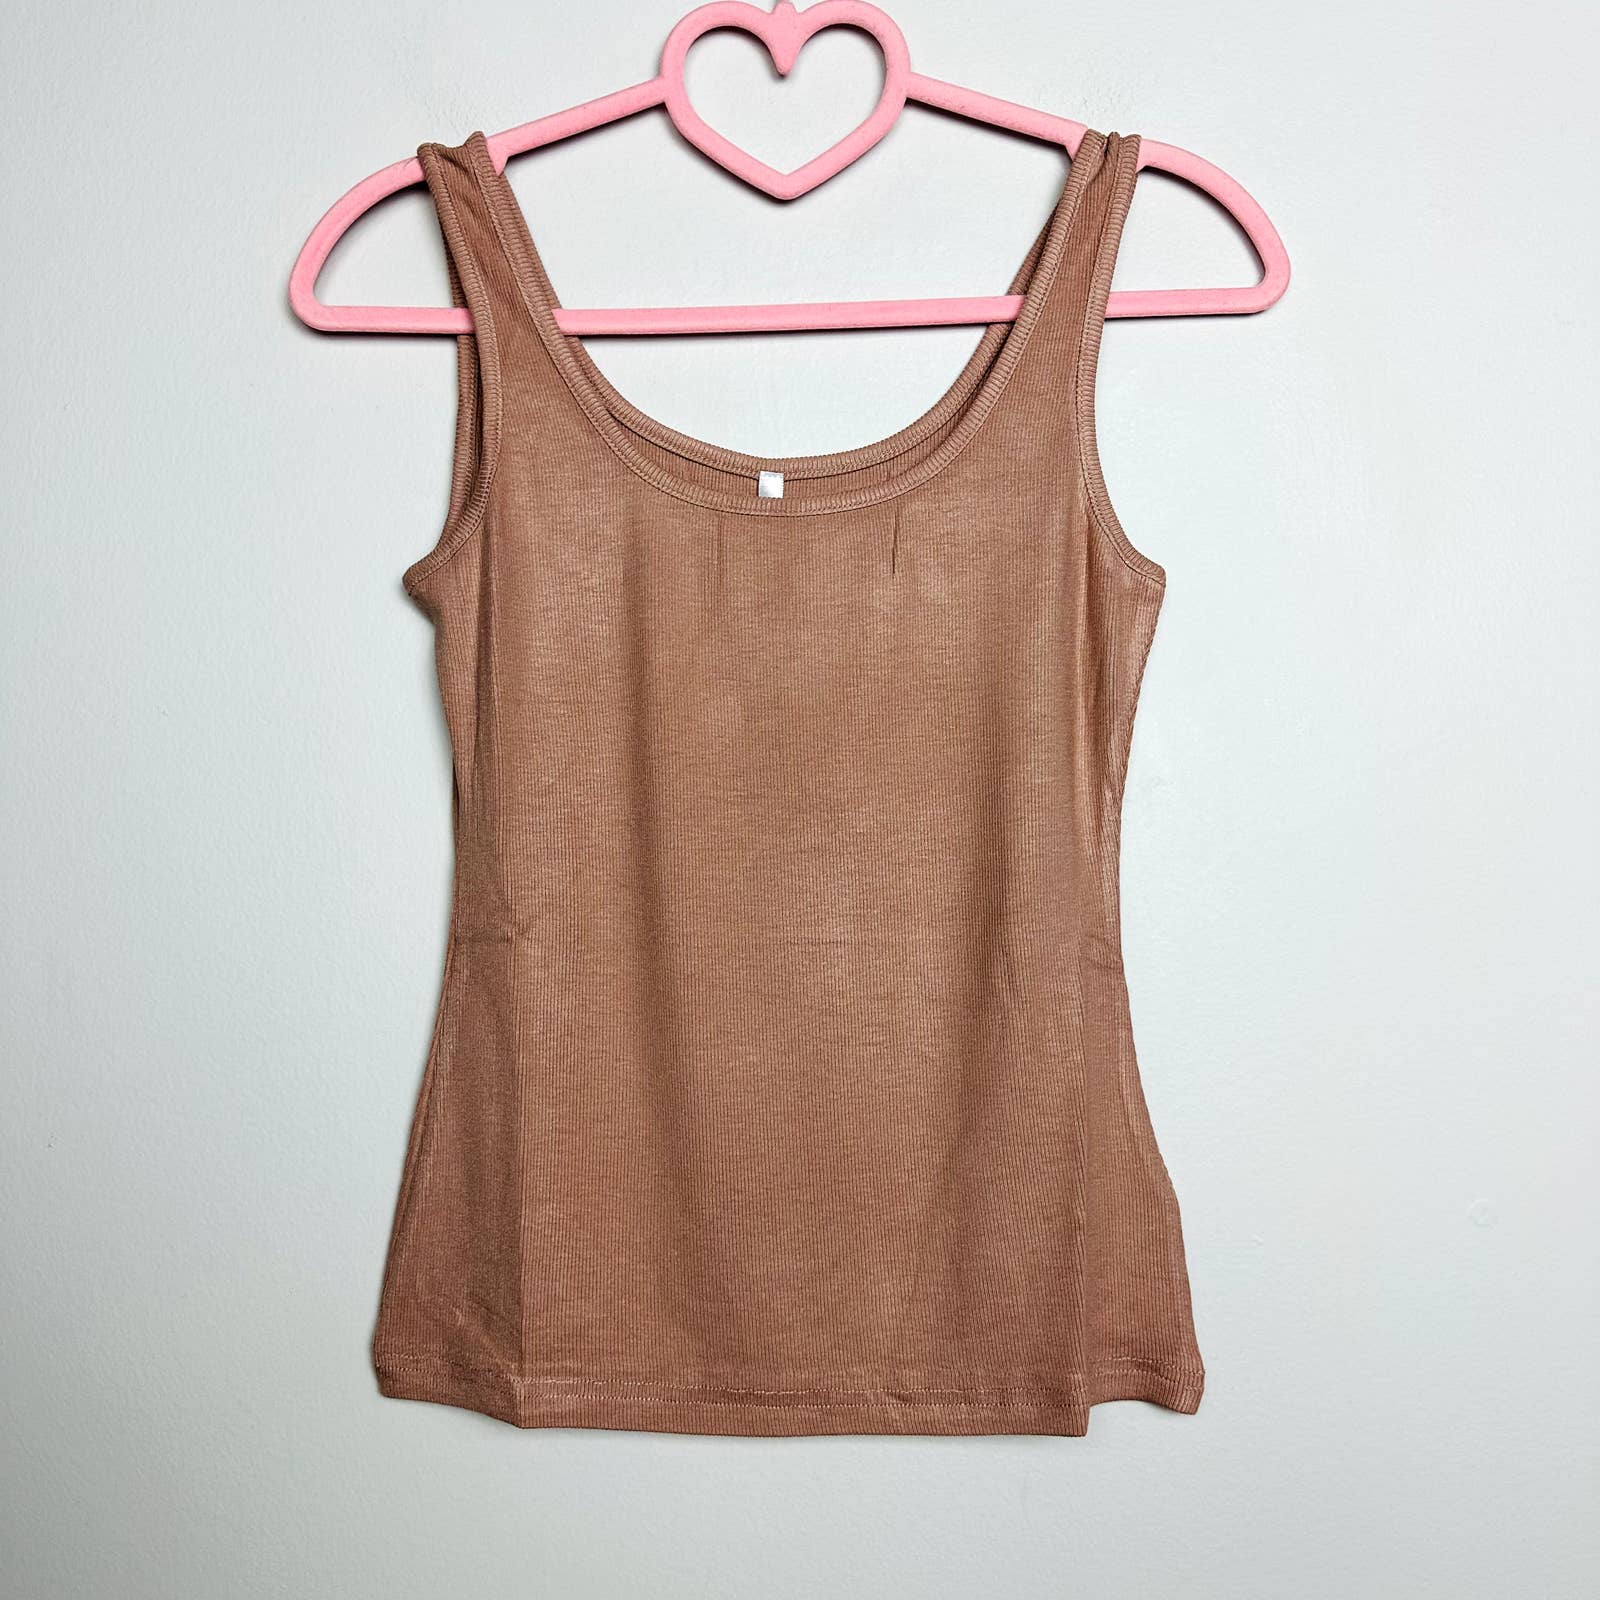 Lulus NWT Staple Style Ribbed Knit Scoop Neck Tank Top Dusty Rose Size Small